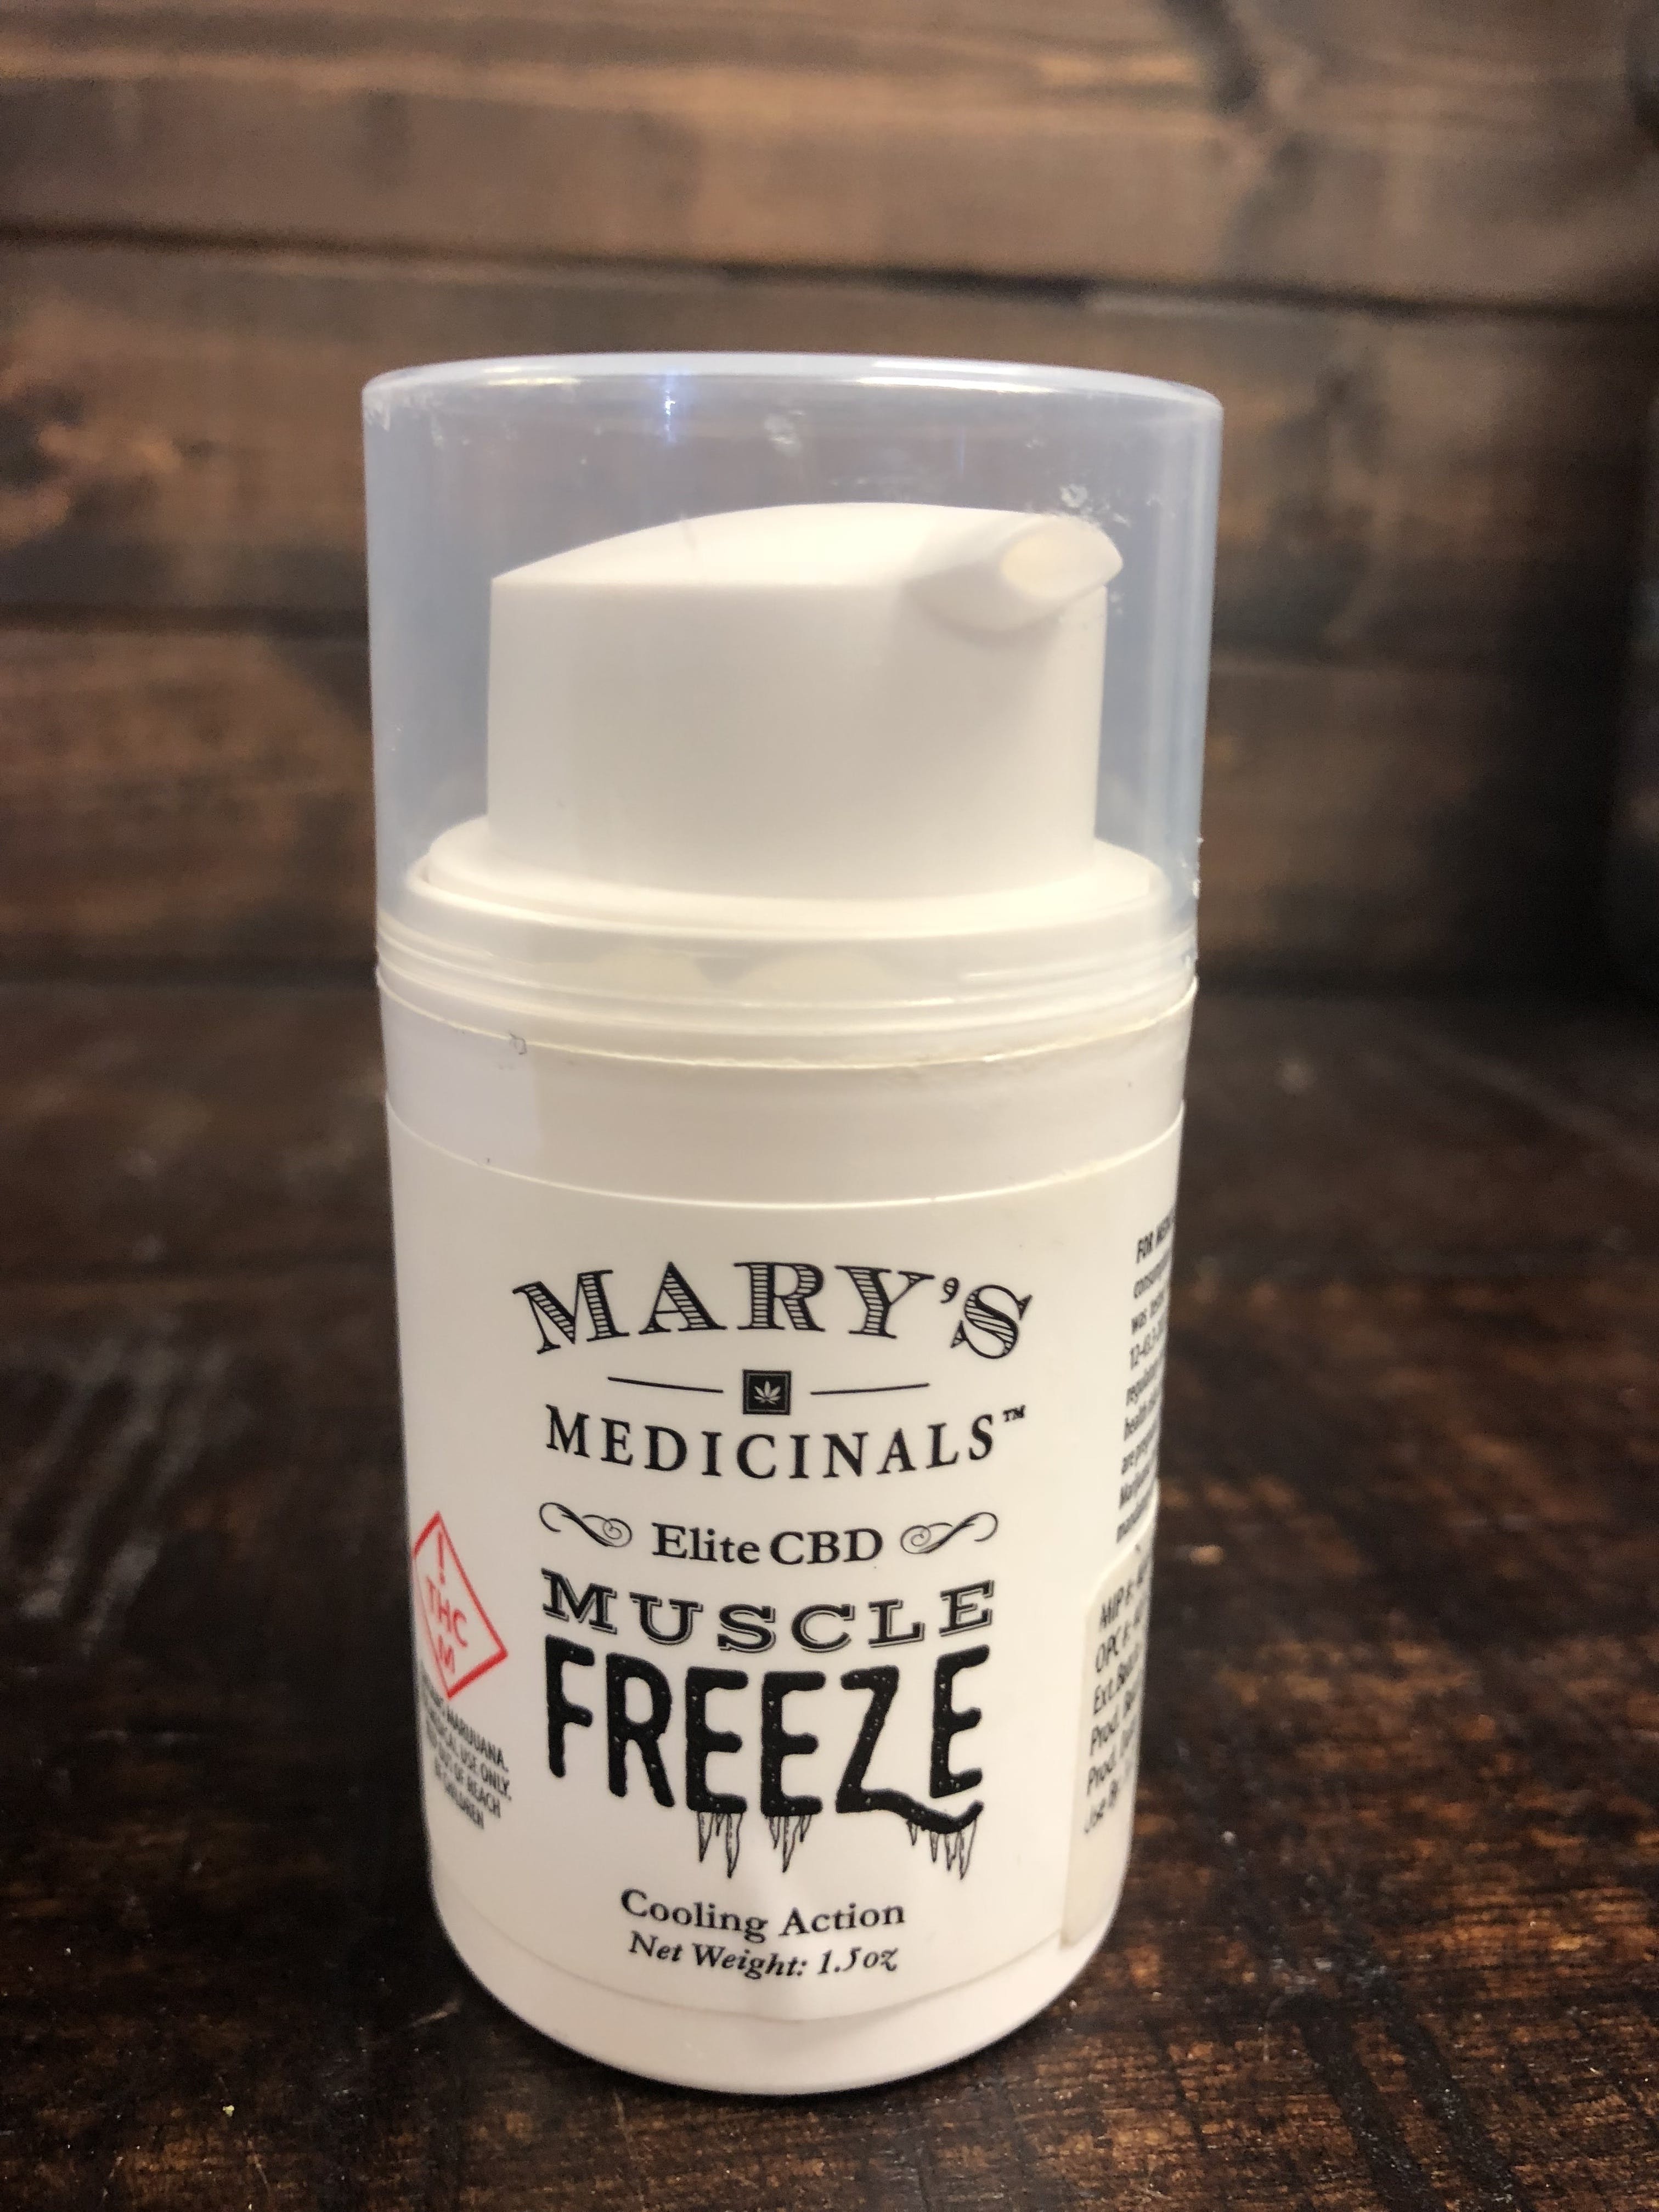 topicals-med-marys-medicinals-1-5-oz-muscle-freeze